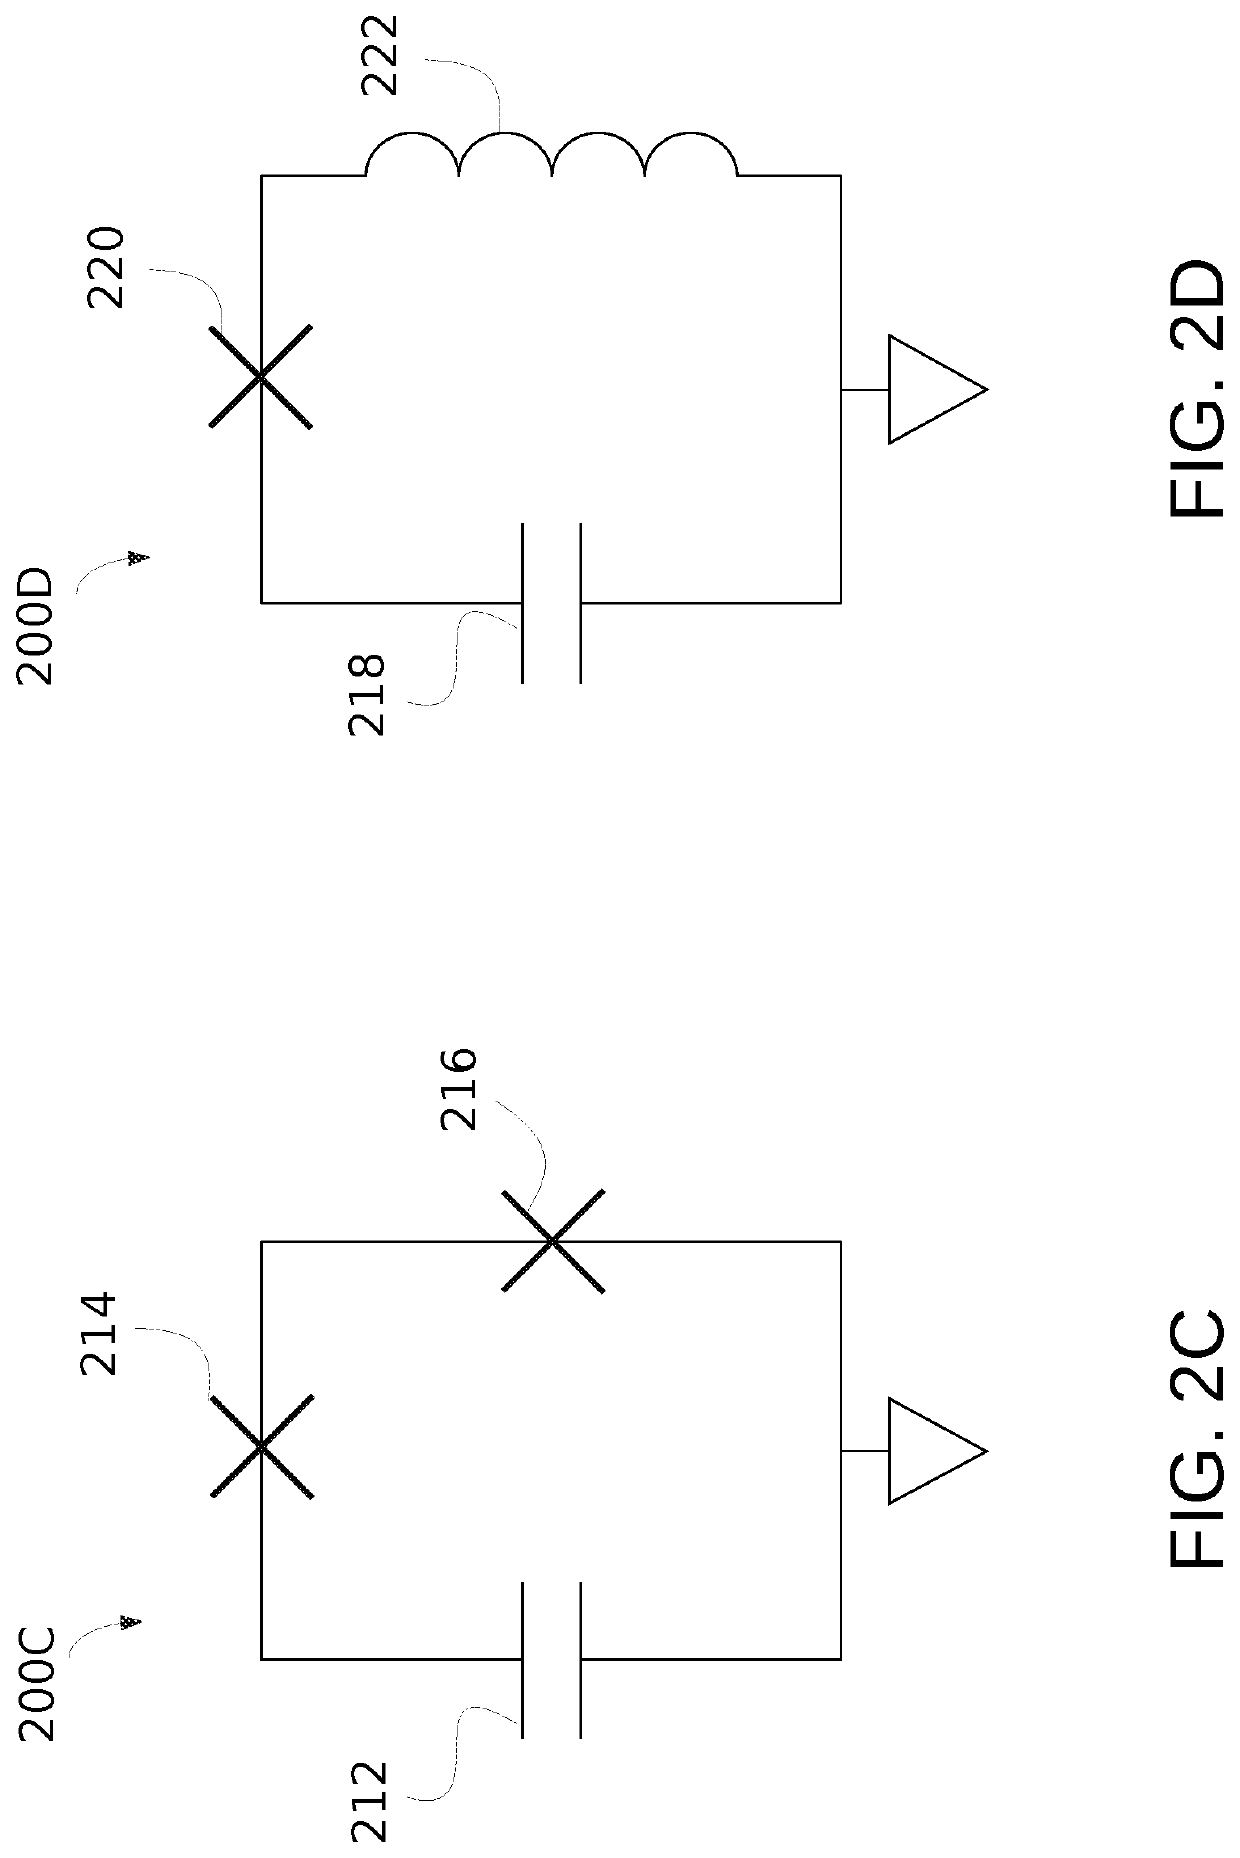 Qubit circuit and method for topological protection